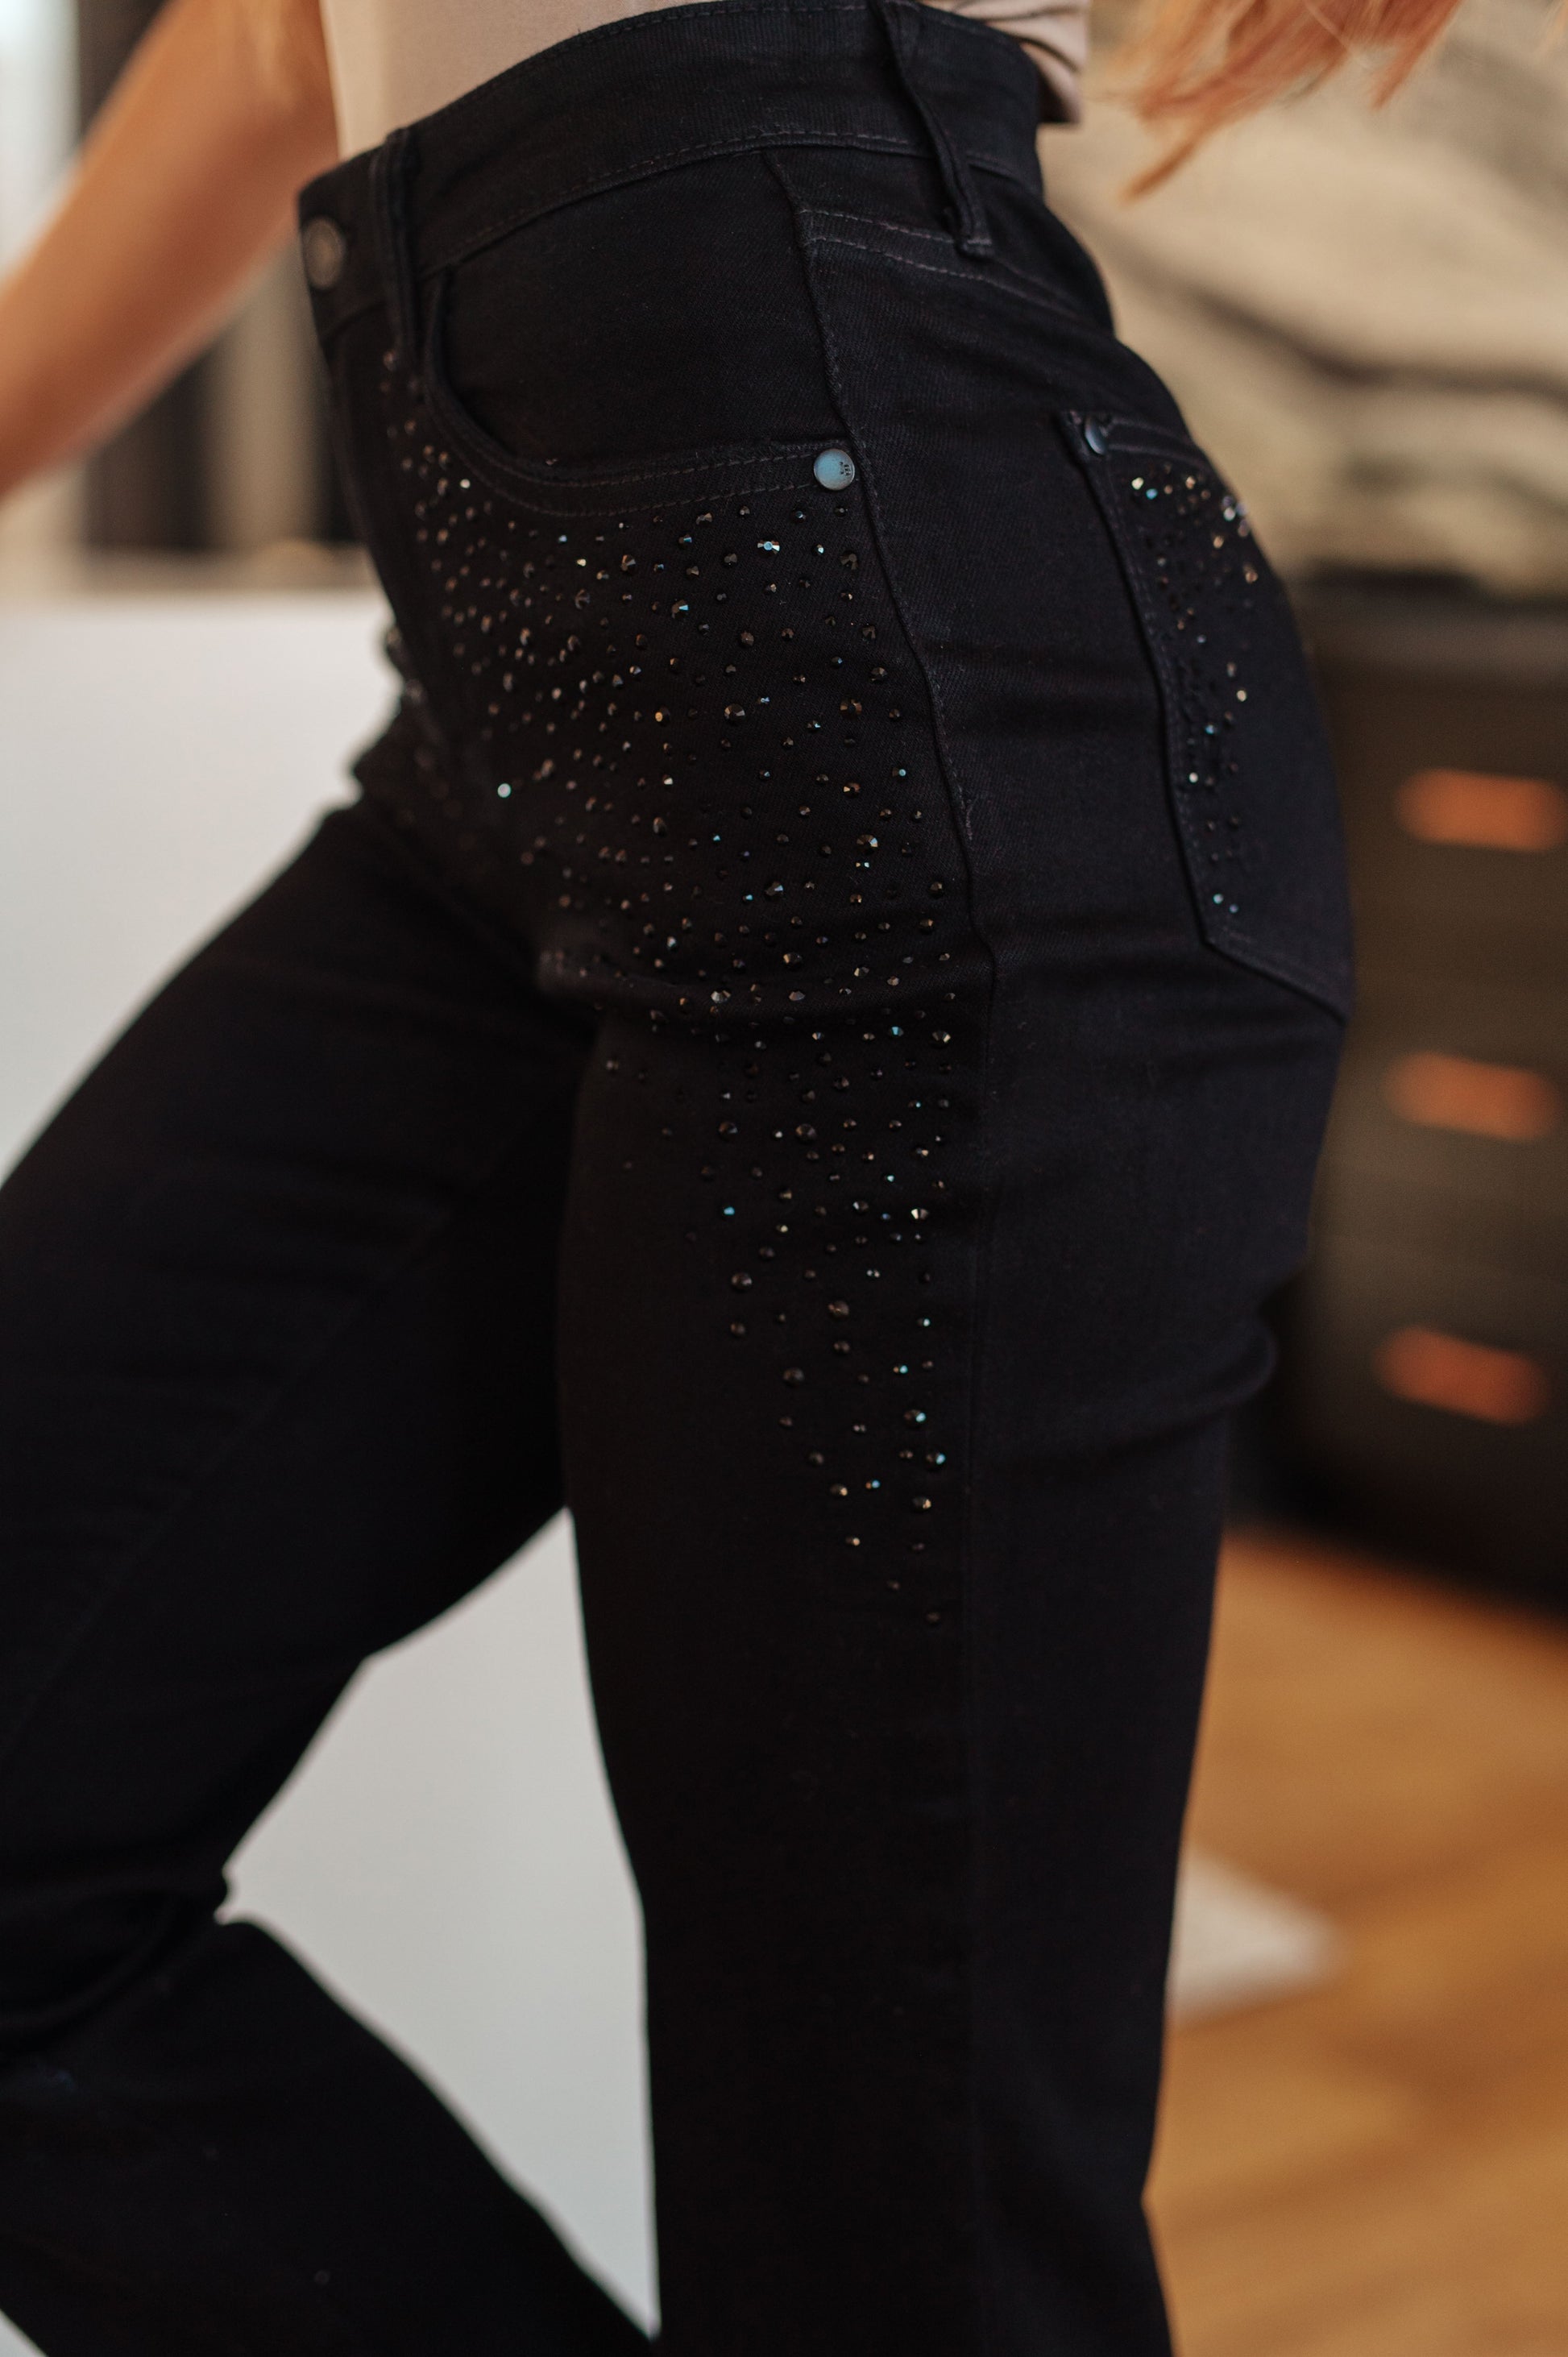 Unlock your unique style with Reese Rhinestone Slim Fit Jeans! Their high-rise fit and stretchy denim ensure comfort while the rhinestones add sophisticated flair. Bring out your inner sparkle and elevate your look! 0 - 24W